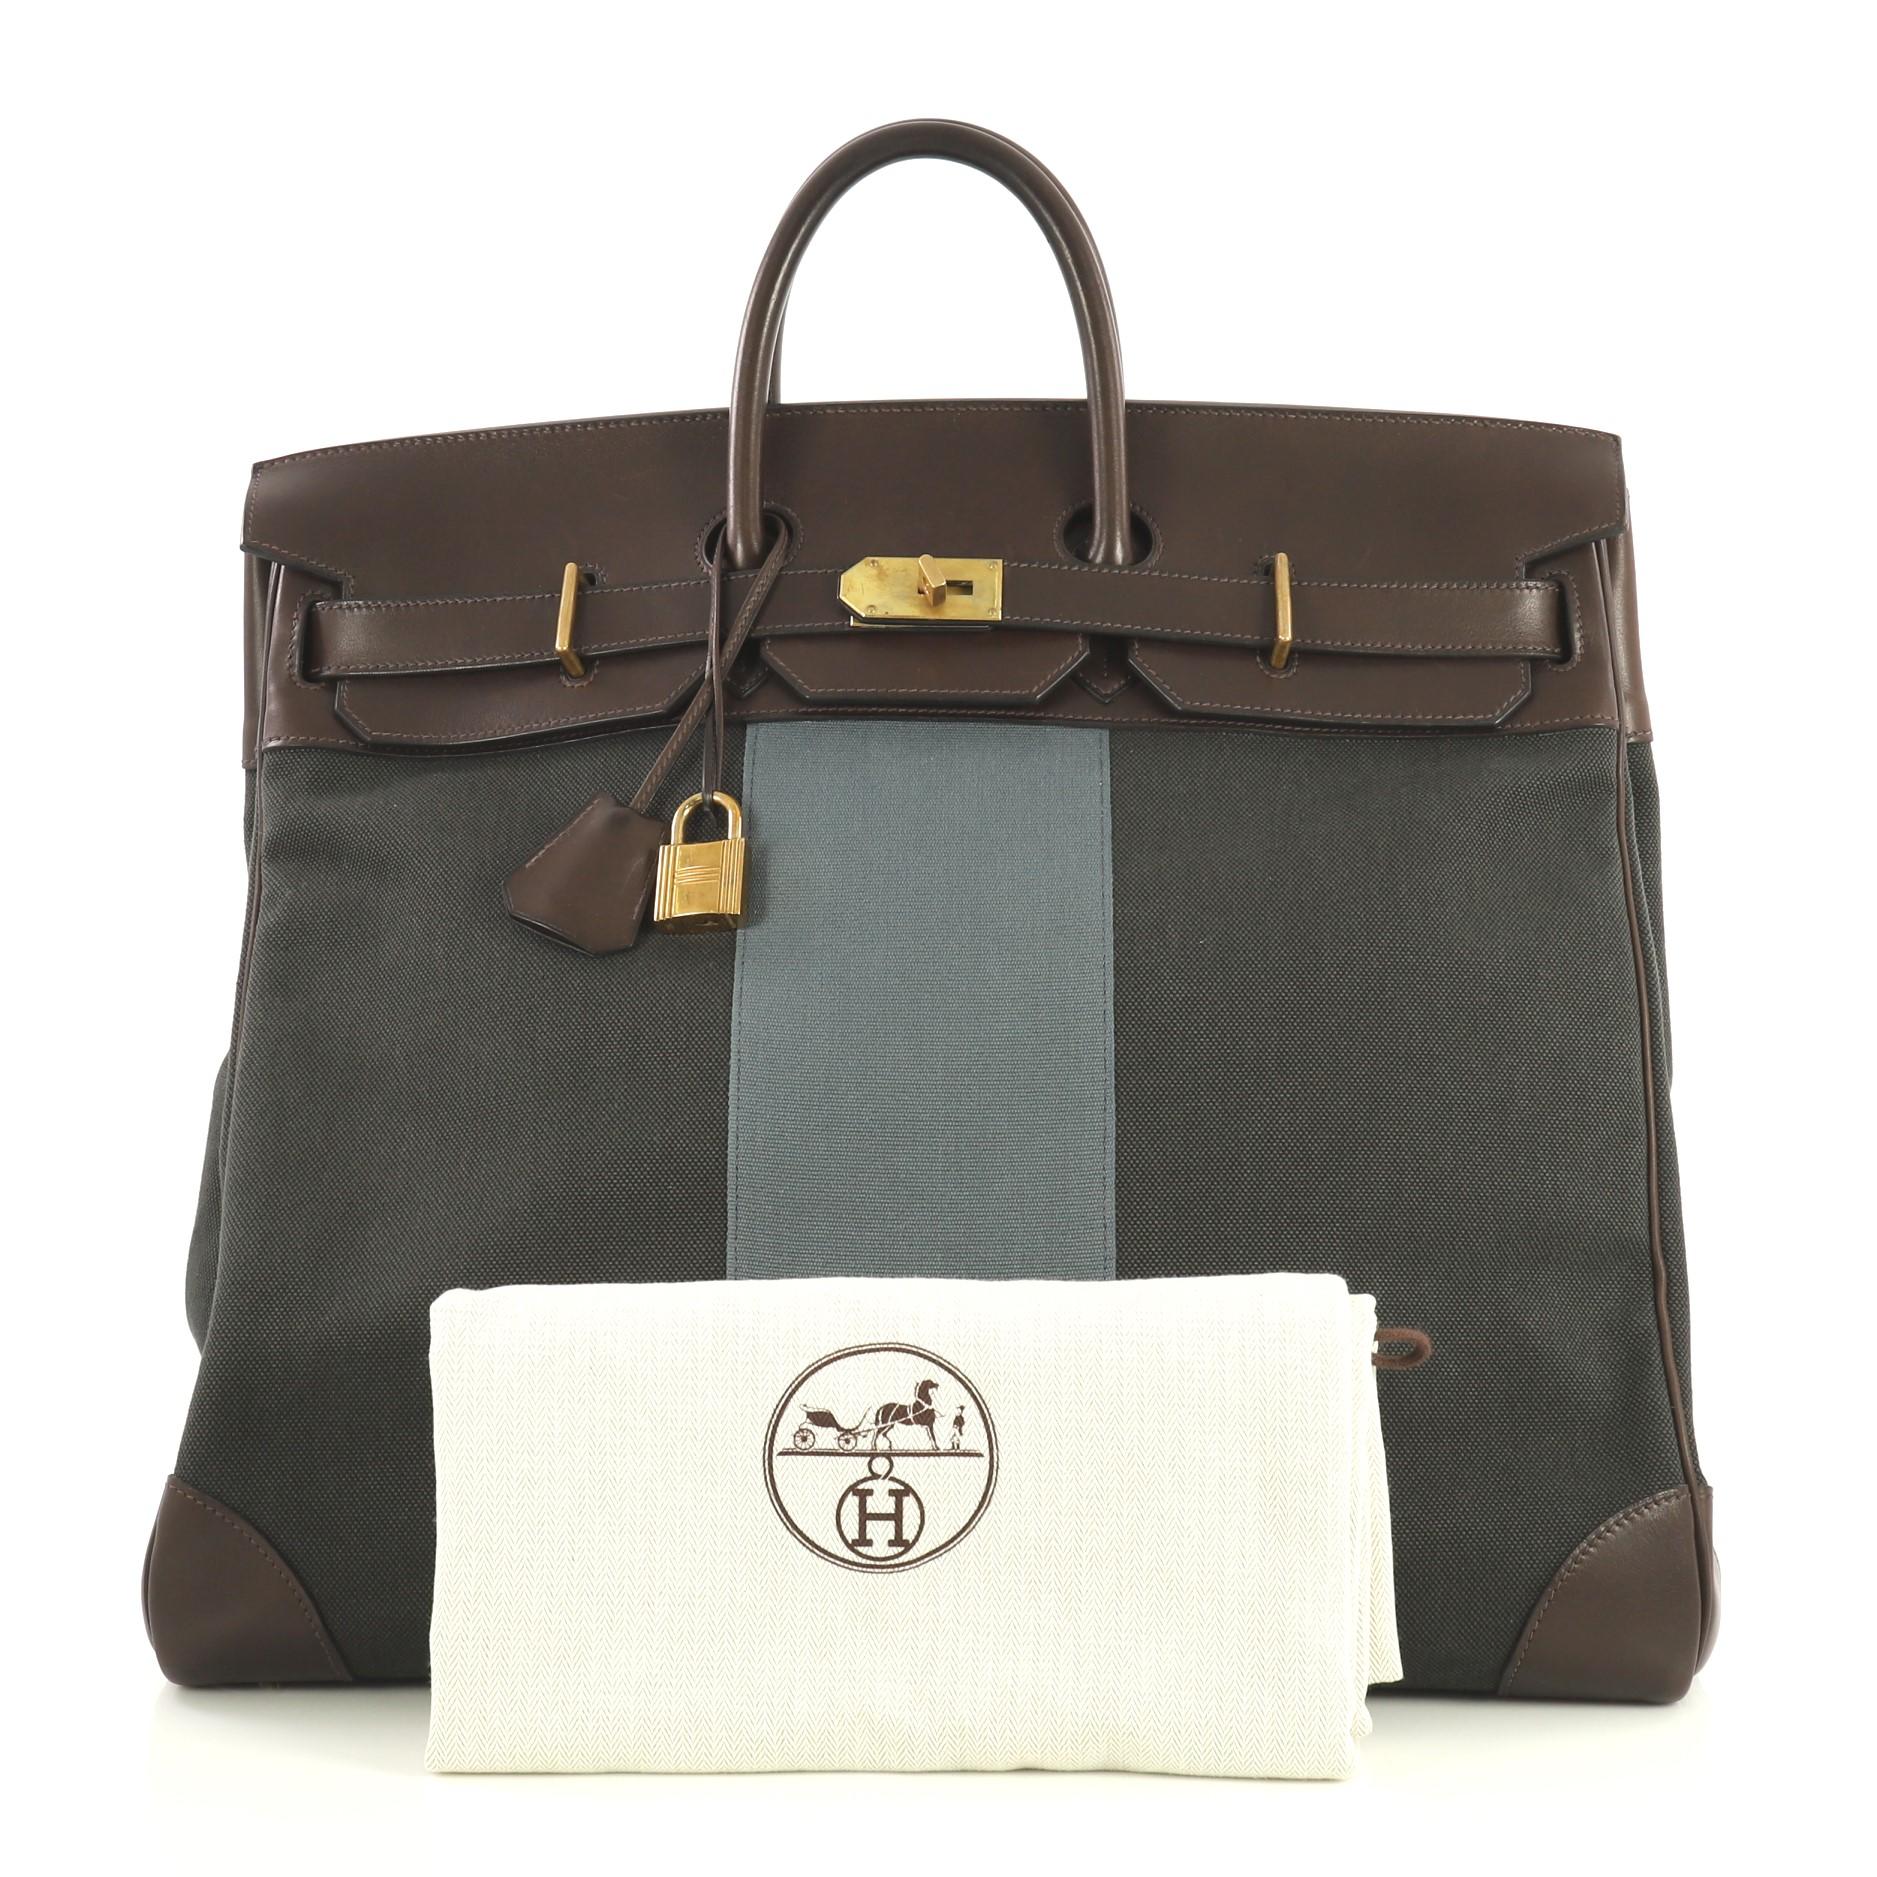 This Hermes Flag HAC Birkin Bag Toile and Evercalf 50, crafted in Multicolor Toile H and Toile Galon and Ebene brown Evercalf leather, features dual rolled handles, front flap, and brass hardware. Its turn-lock closure opens to a Graphite Toile H